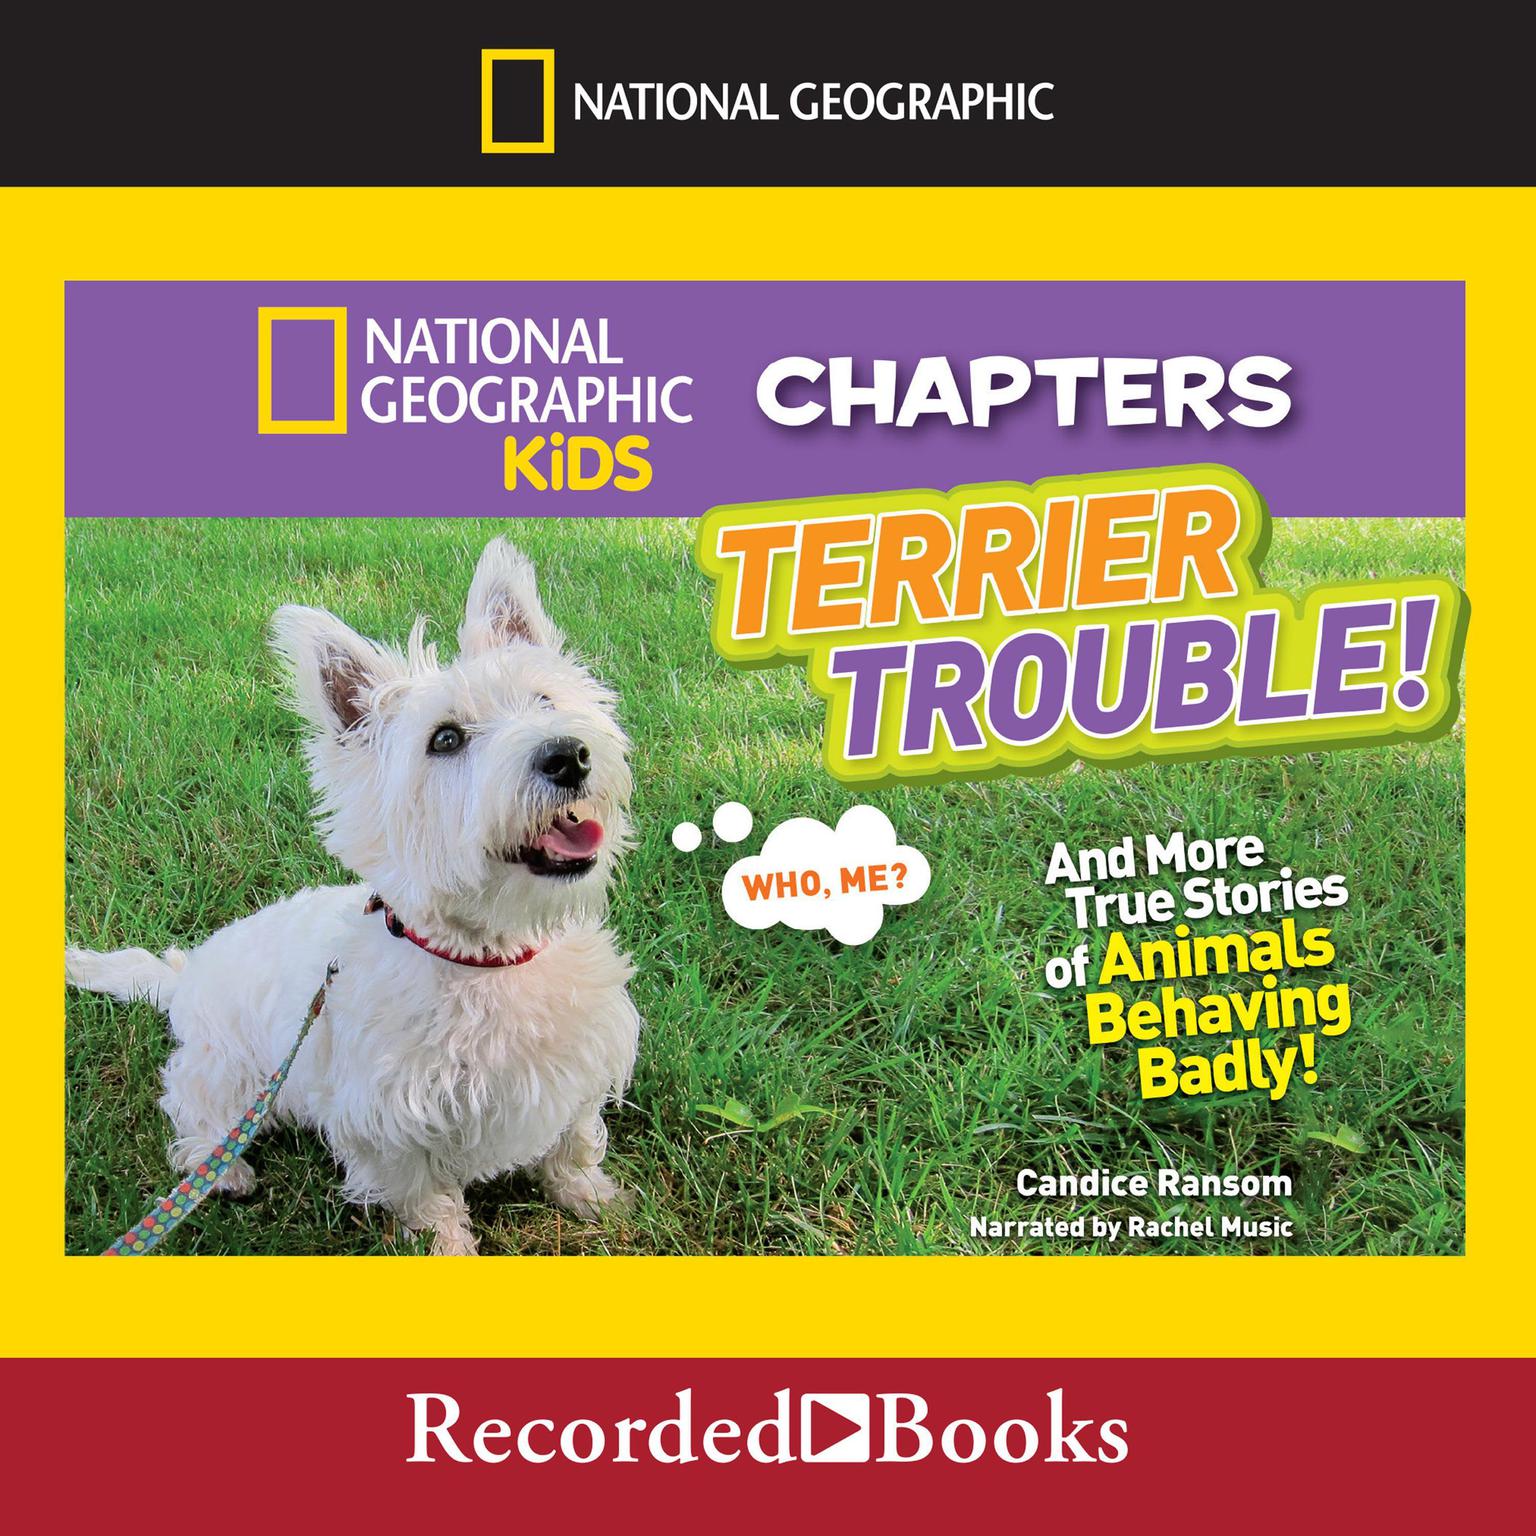 Terrier Trouble!: And More True Stories of Animals Behaving Badly Audiobook, by Candice Ransom